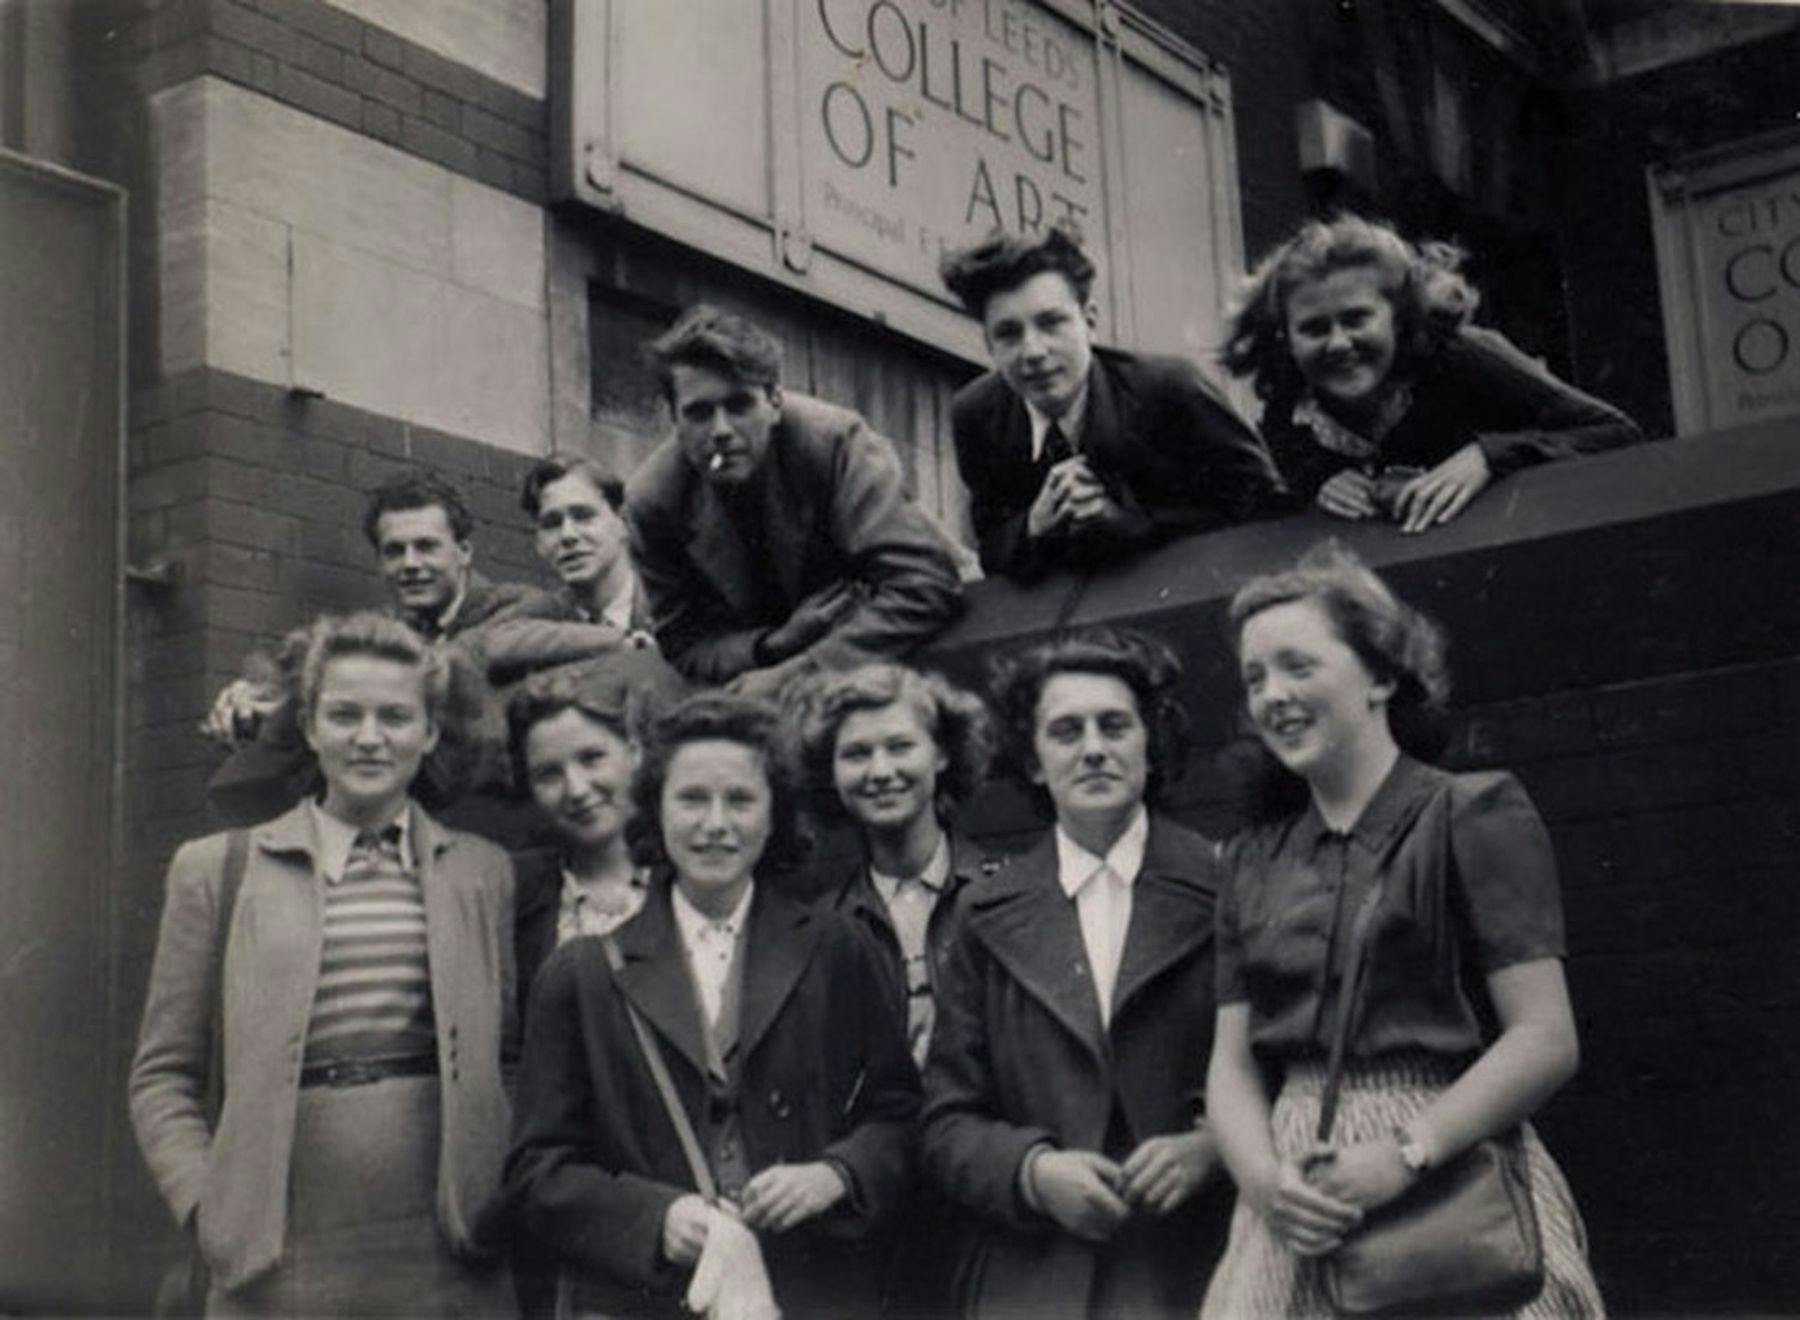 Students on the steps of our Vernon Street building. Back left to right, David Steel, Jim Downer, Alan Hartley, Ted Jenkins, Pam Kerkham.  Front left to right, Cherry Hagues, unknown, Audrey, unknown, Beryl Bellfield, Enid Swaine. Photograph courtesy of Janet Rawlins who attended from 1952-57.